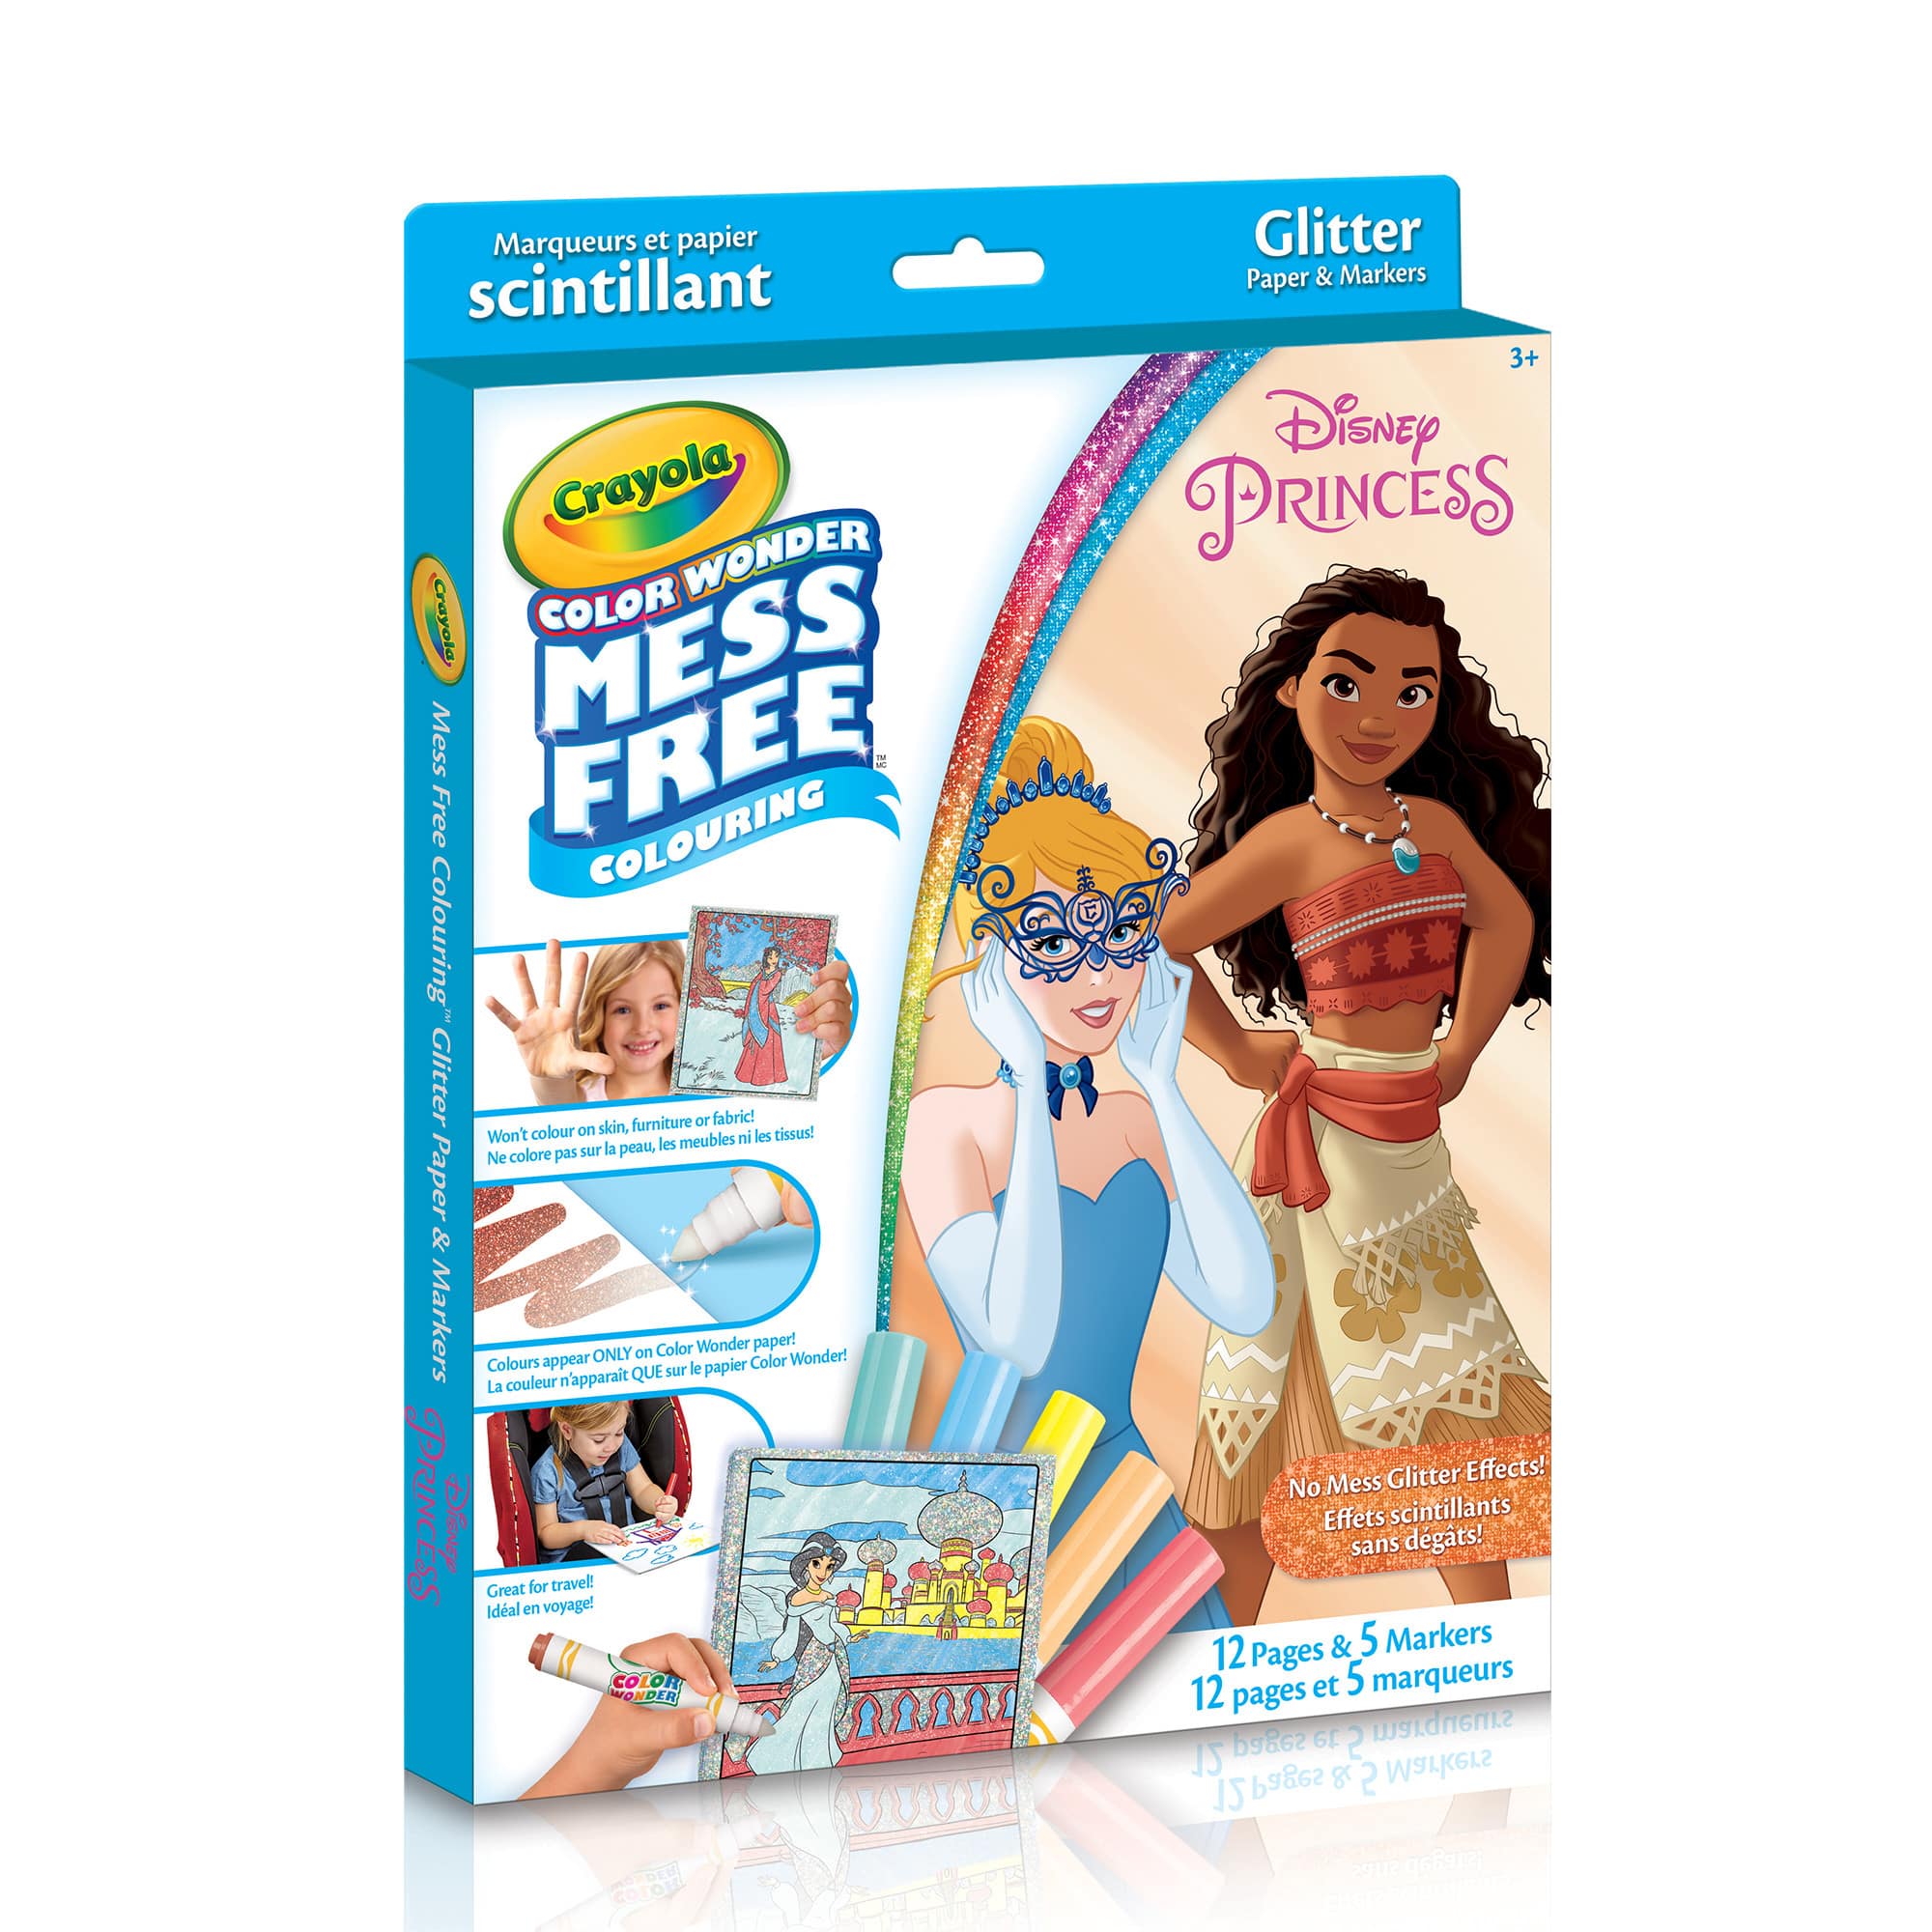 Crayola Color Wonder Mess Free Coloring 18 Coloring Pages and 5 Markers Disney Princess 